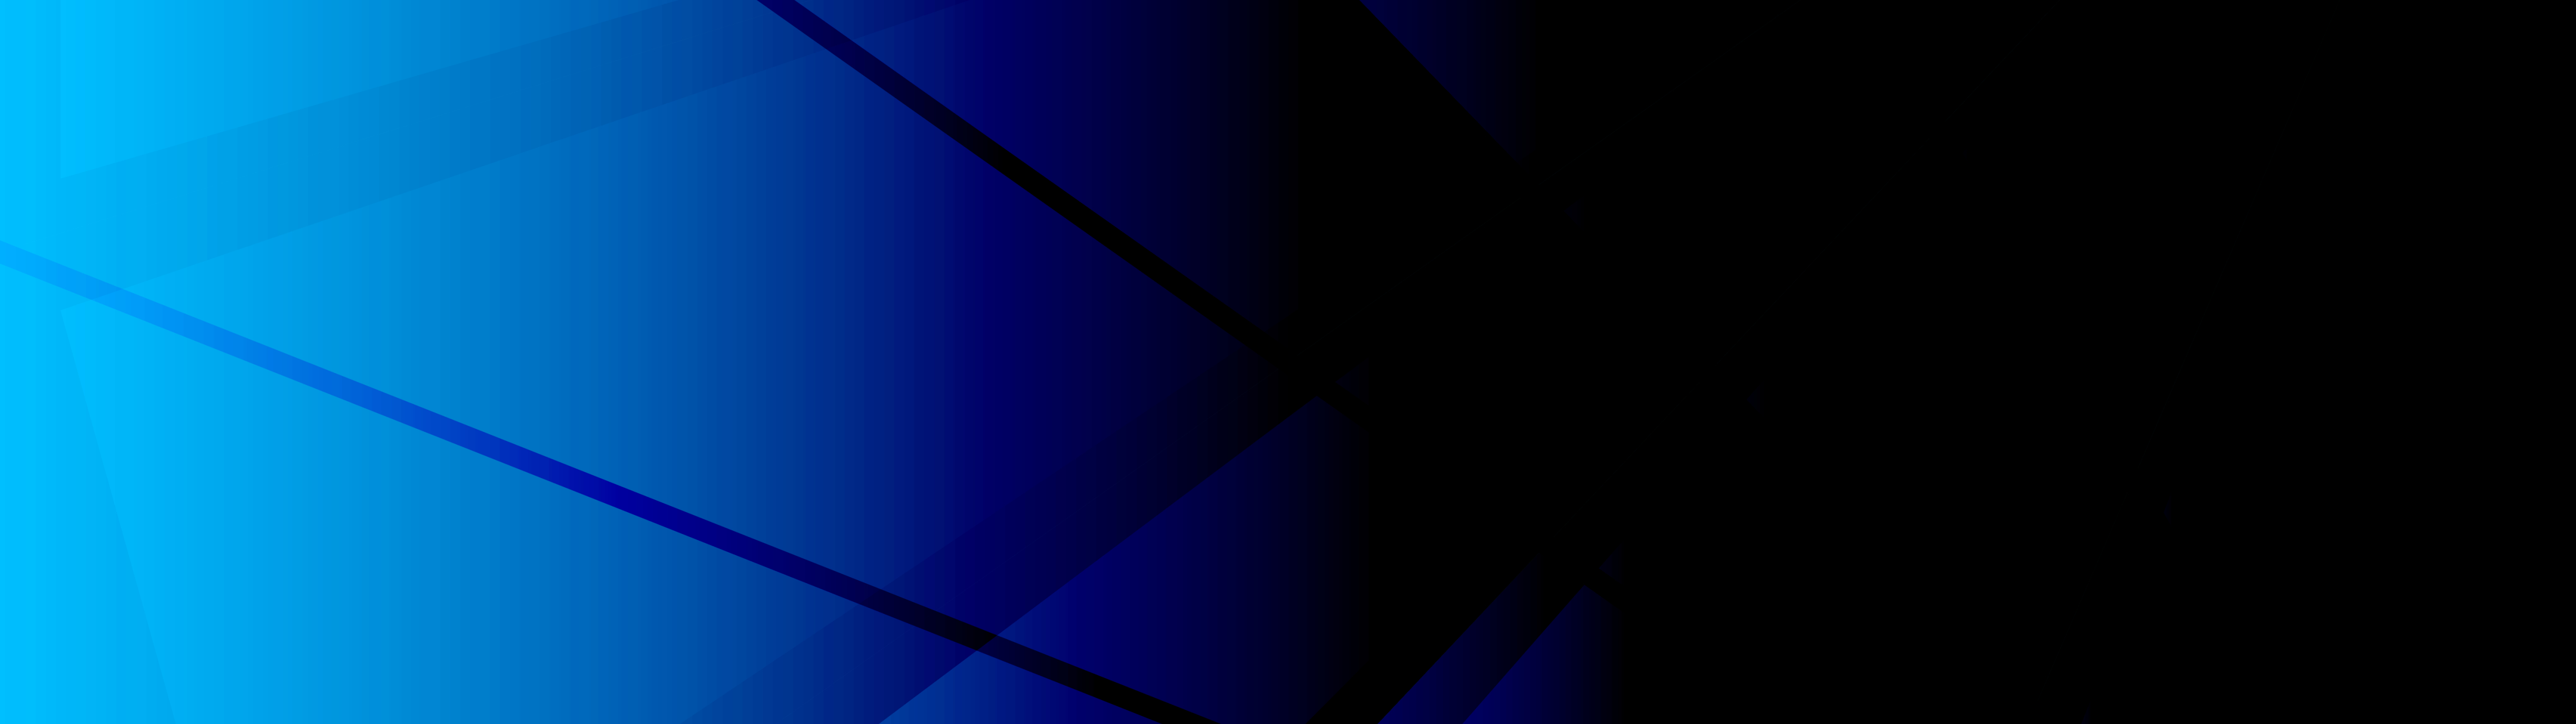 5120x1440 Triangle Geometric Blue Amoled Art 5K 5120x1440 Resolution  Wallpaper, HD Artist 4K Wallpapers, Images, Photos and Background -  Wallpapers Den